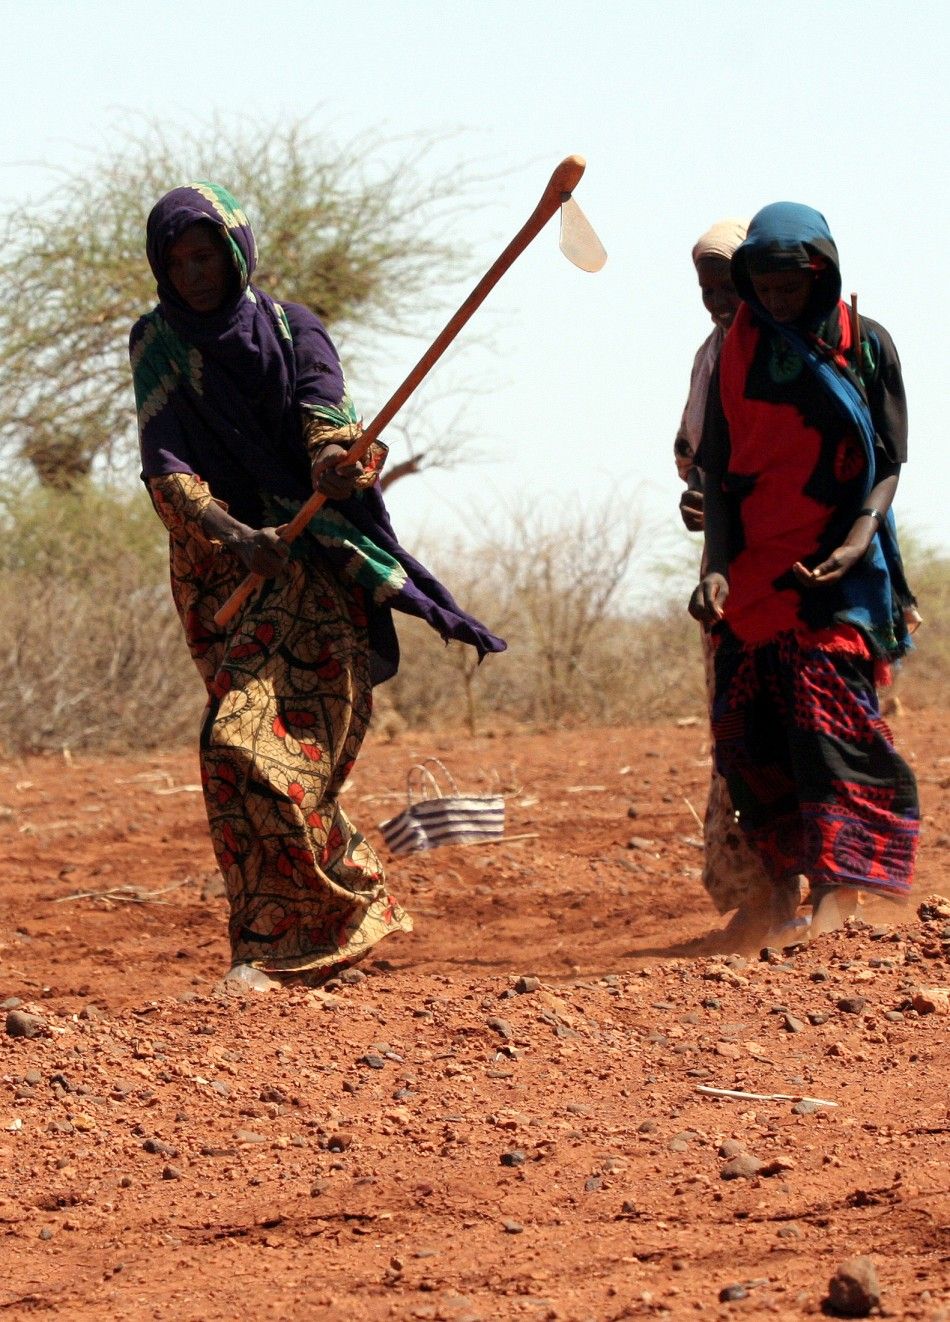 Worst drought of Africa in 60 years